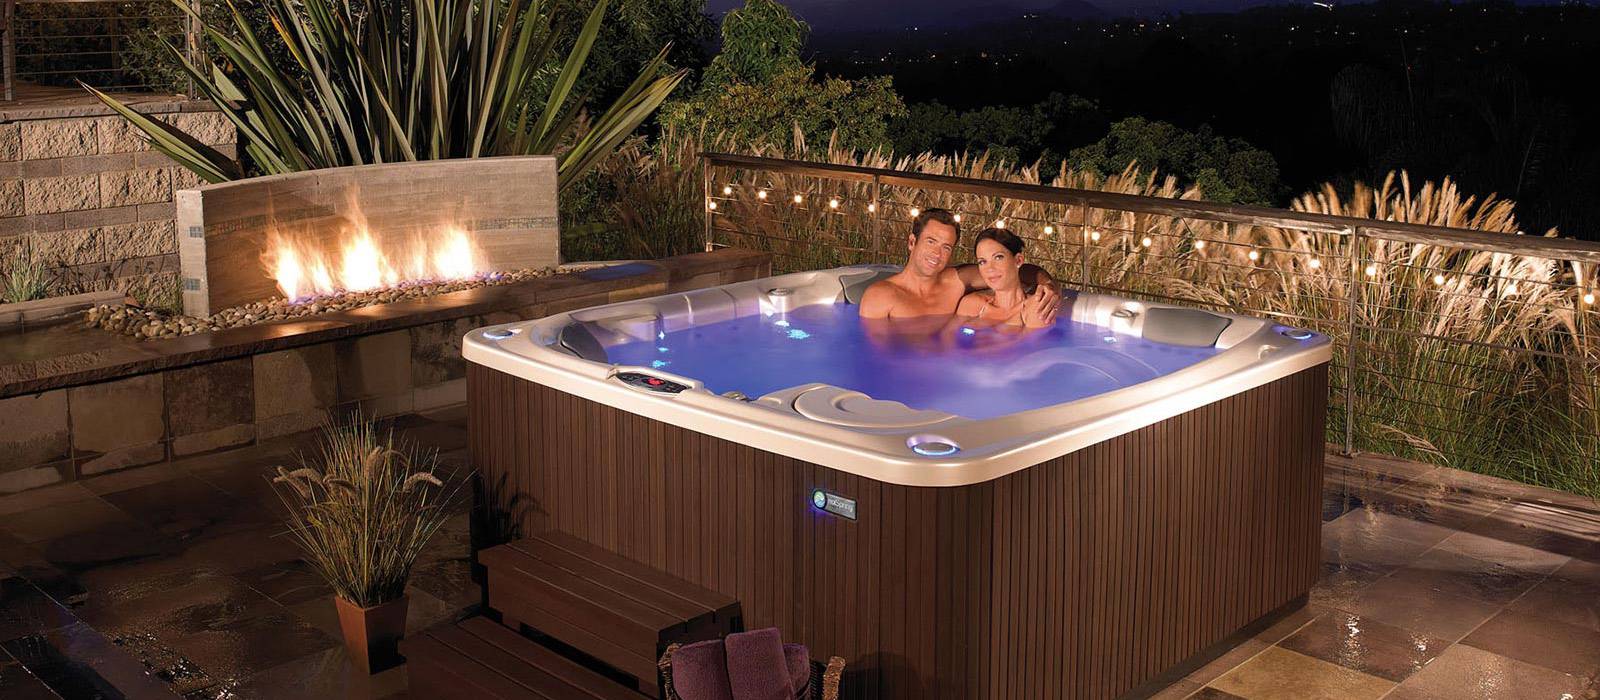 Bring luxury and style to your backyard with the elegant Flair hot tub, featuring the Raio® lighting system with 30 points of light and the tranquil Vidro® backlit waterfall. 